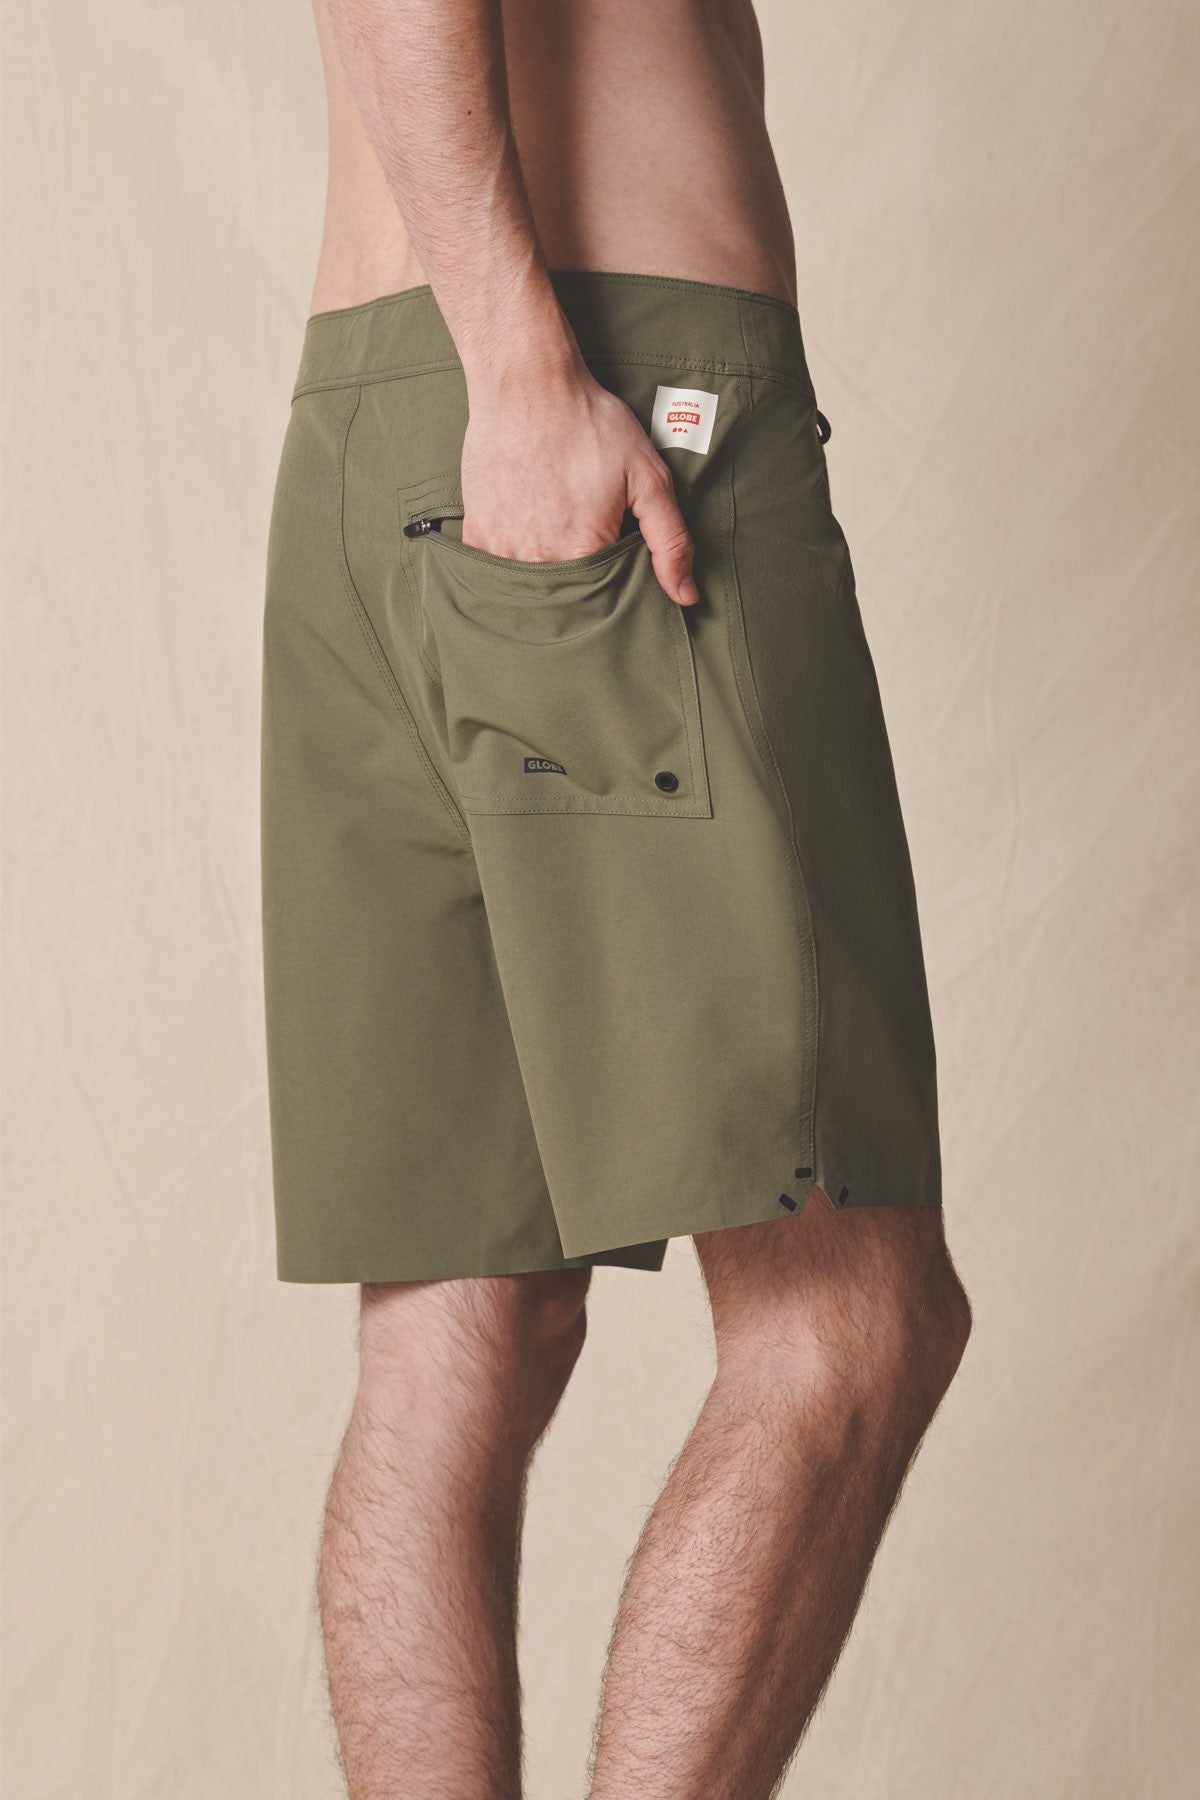 back model in use of Every Swell Boardshort - olive